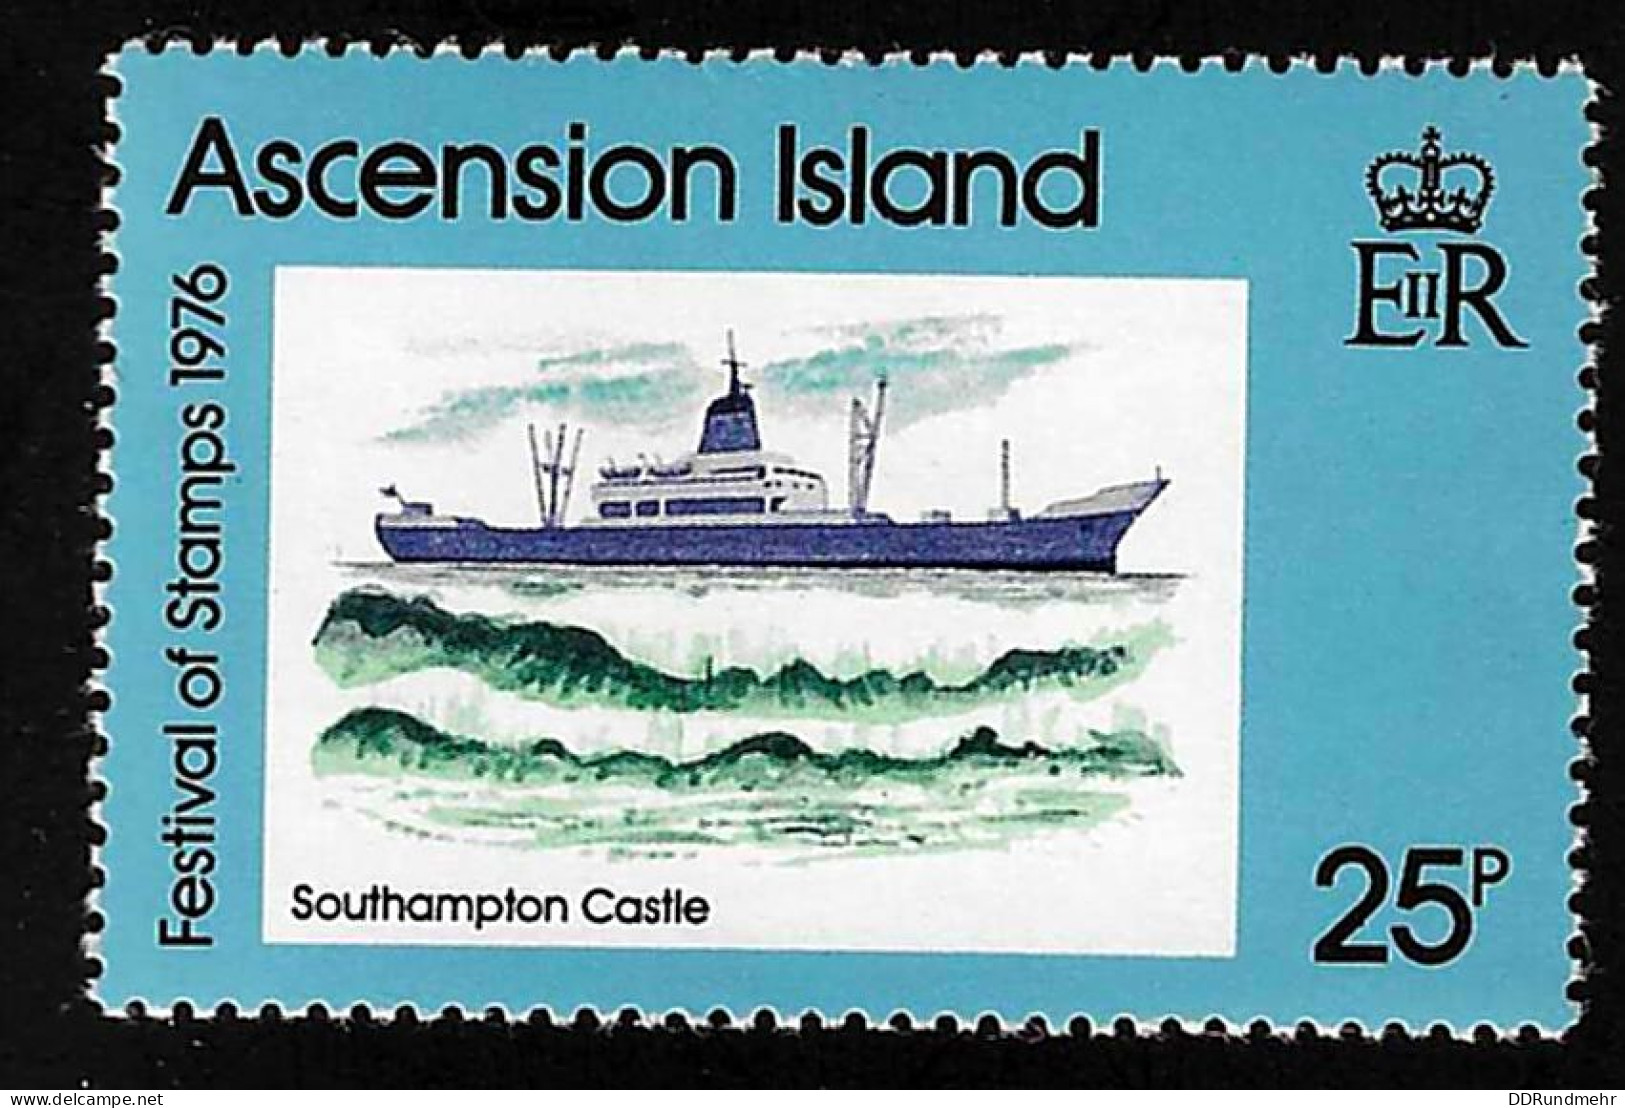 1976 Southampton Castle  Michel AC 214 Stamp Number AC 214 Yvert Et Tellier AC 215 Stanley Gibbons AC 217 Xx MNH - Ascension